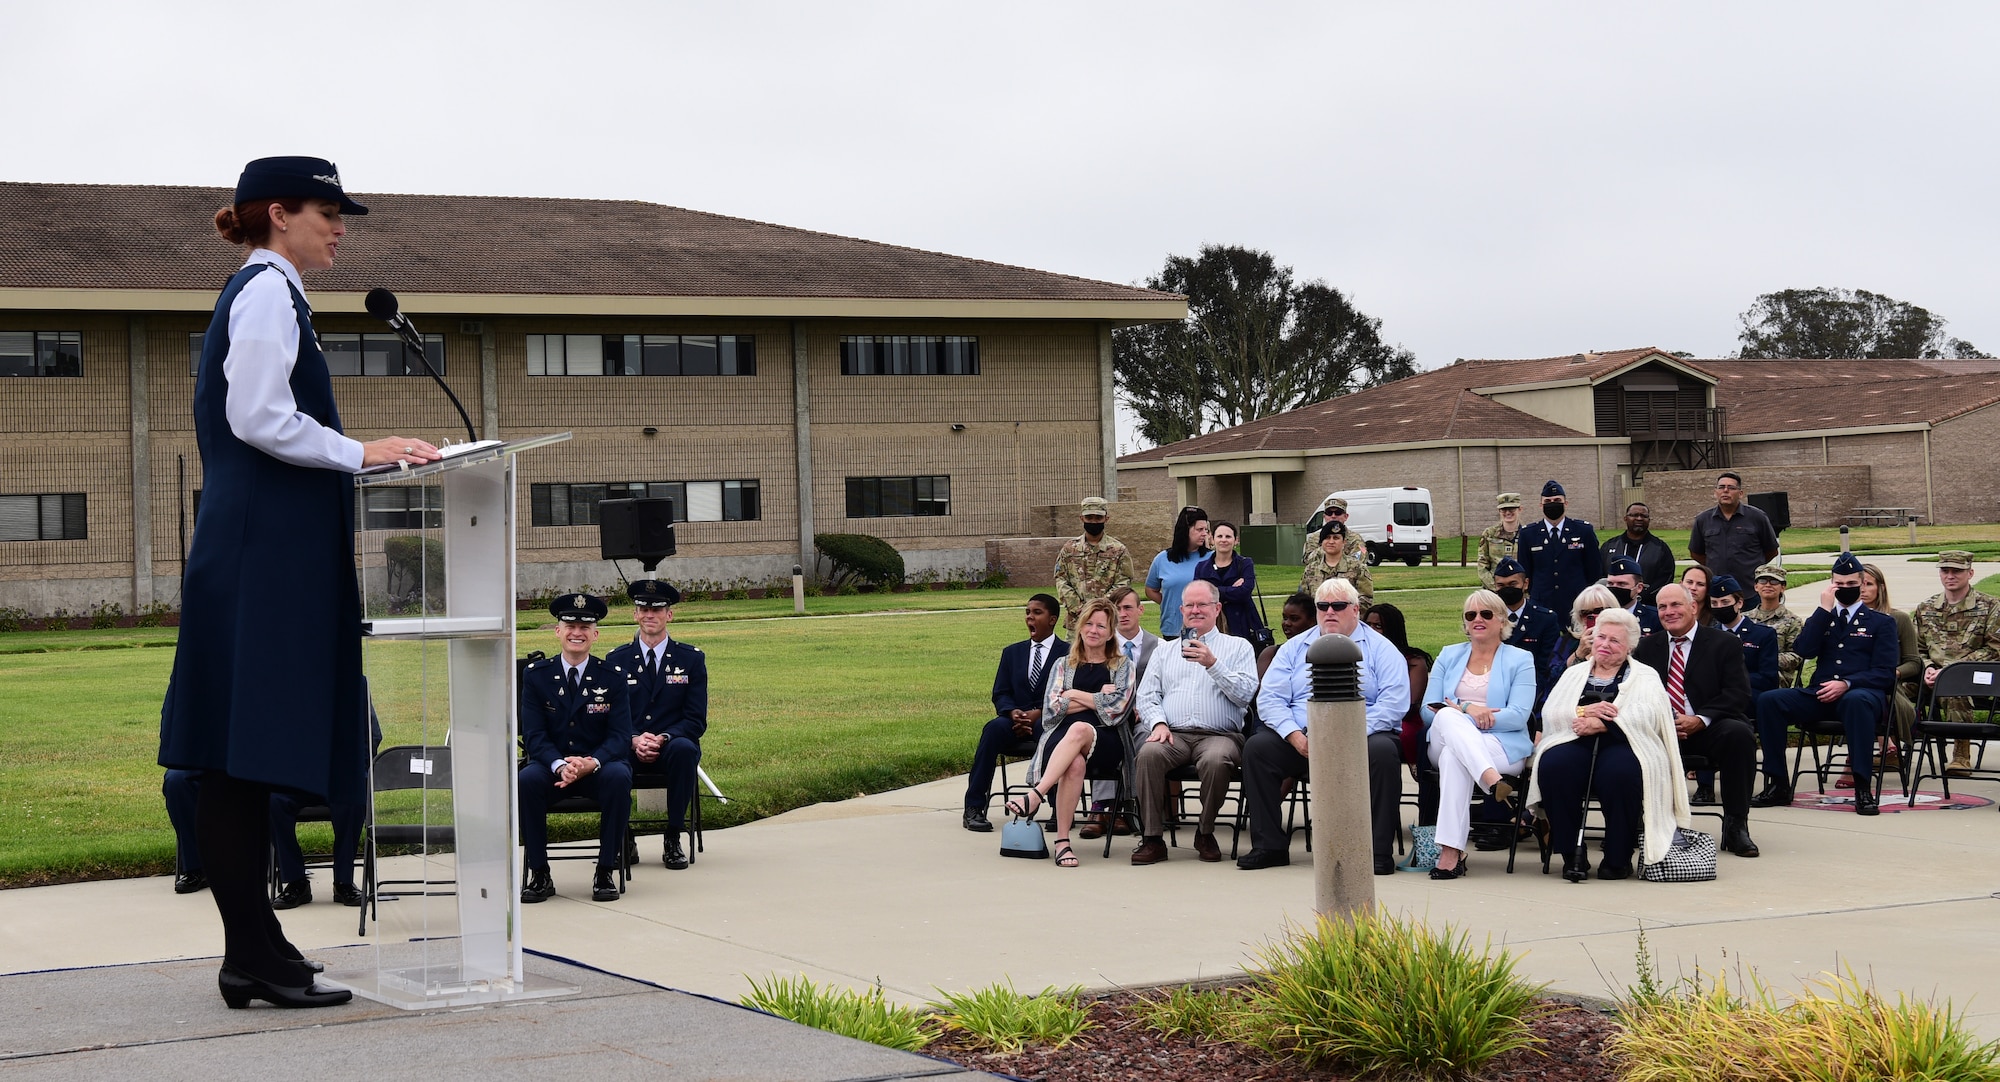 Lt. Col. Tara Shea, 1st Delta Operations Squadron Commander, greeted and spoke to the audience during the assumption of command at Vandenberg Space Force, Base, September 2, 2021.